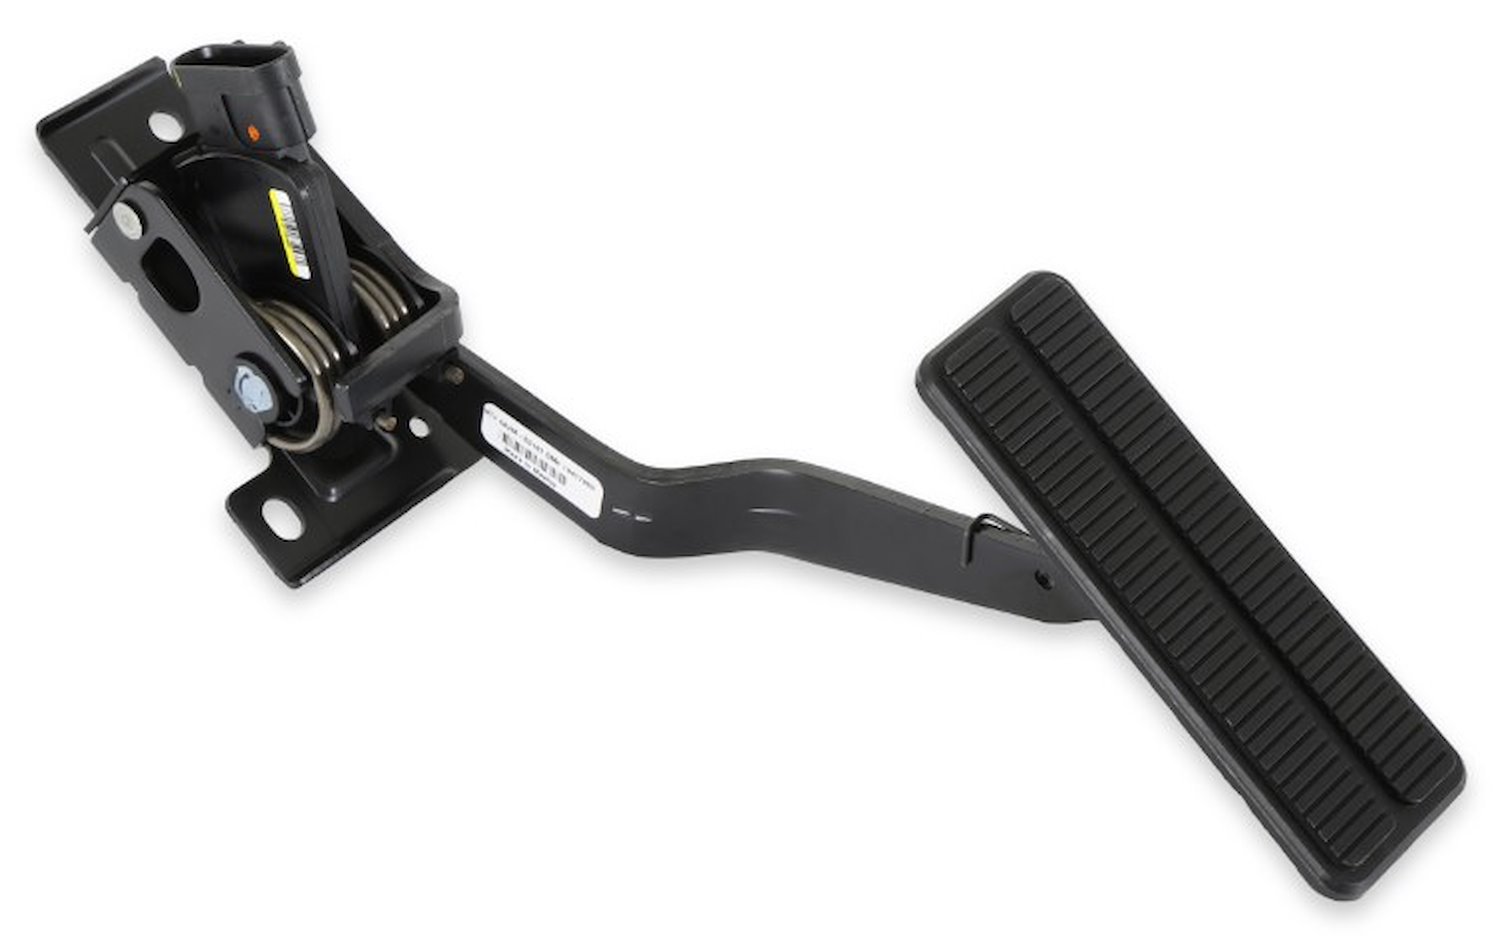 Drive-By-Wire Accelerator Pedal Assembly for GM LS, LT Engine Swaps